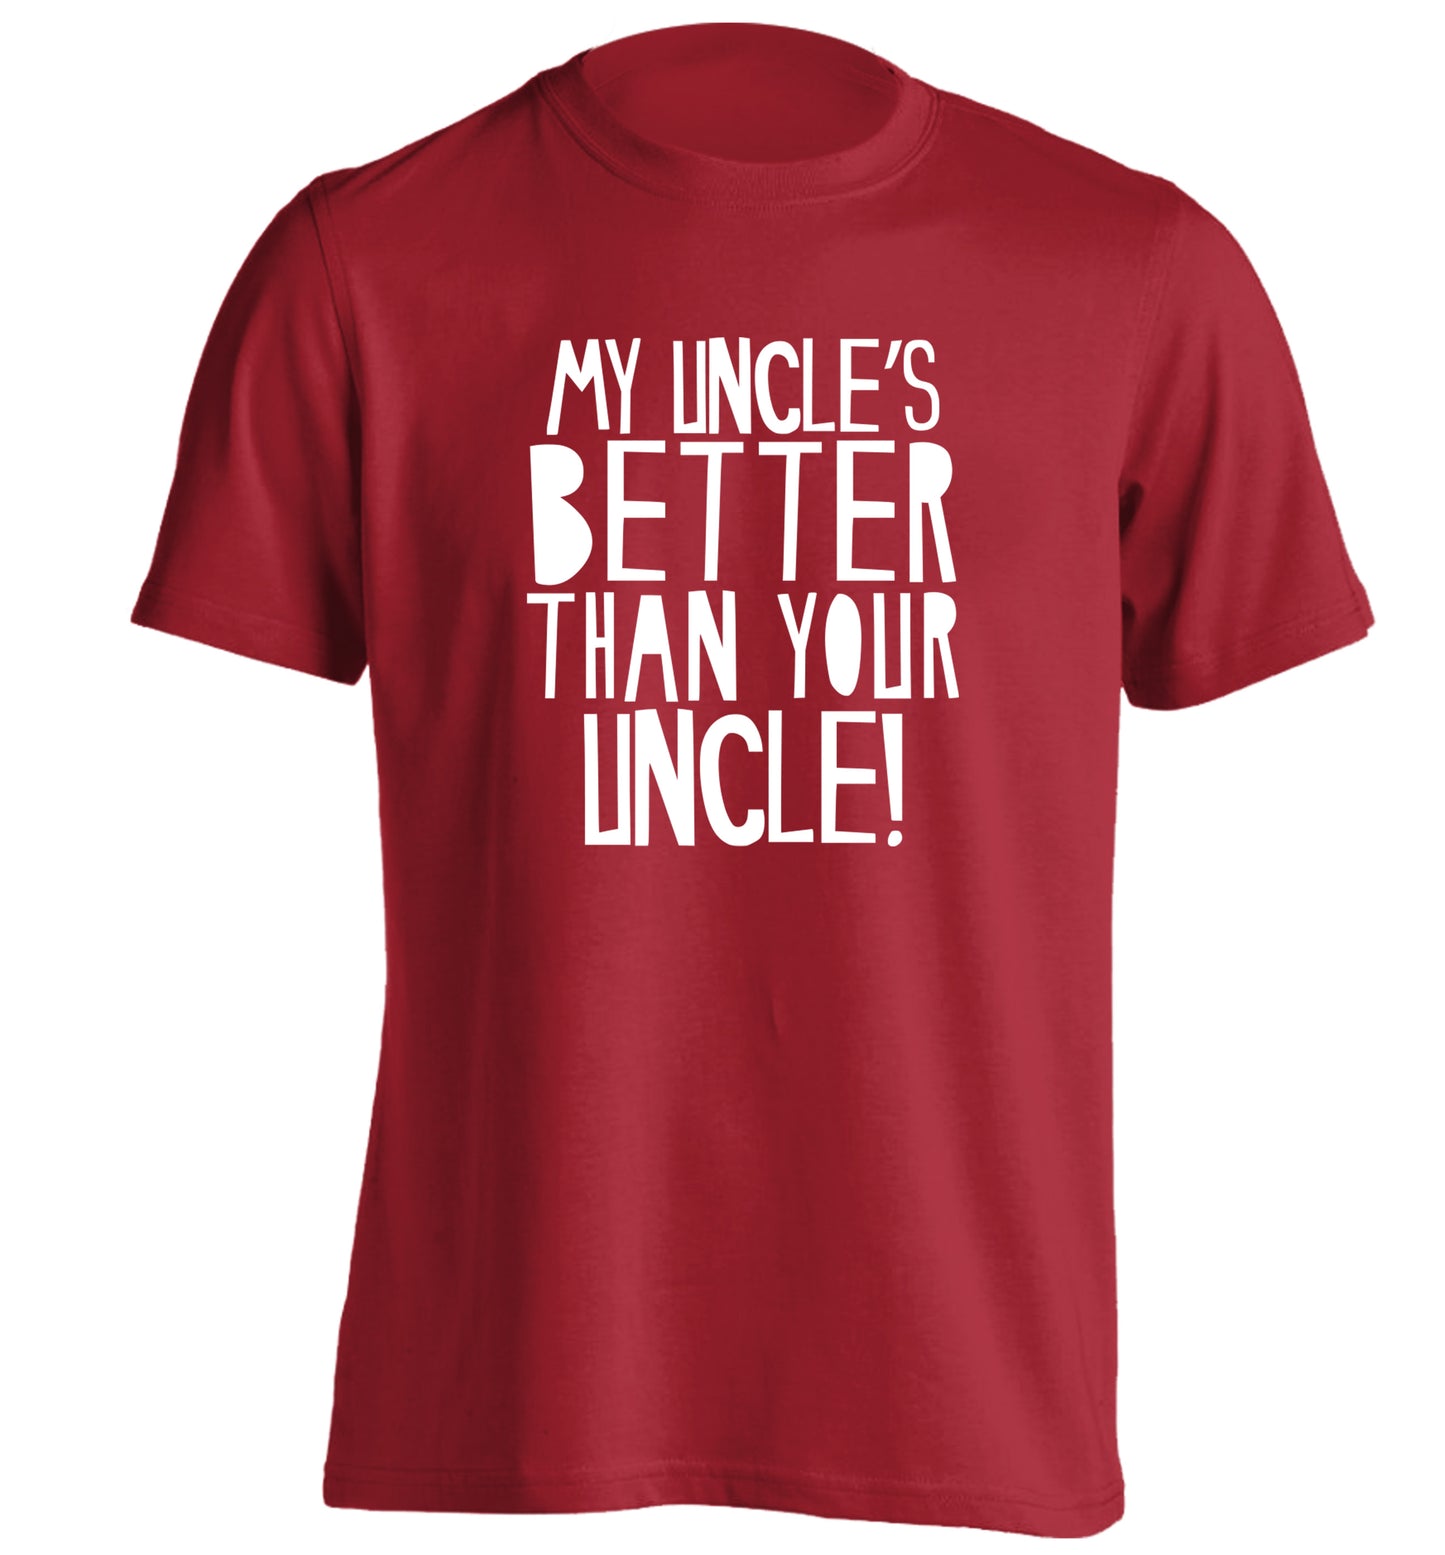 My uncles better than your uncle adults unisex red Tshirt 2XL